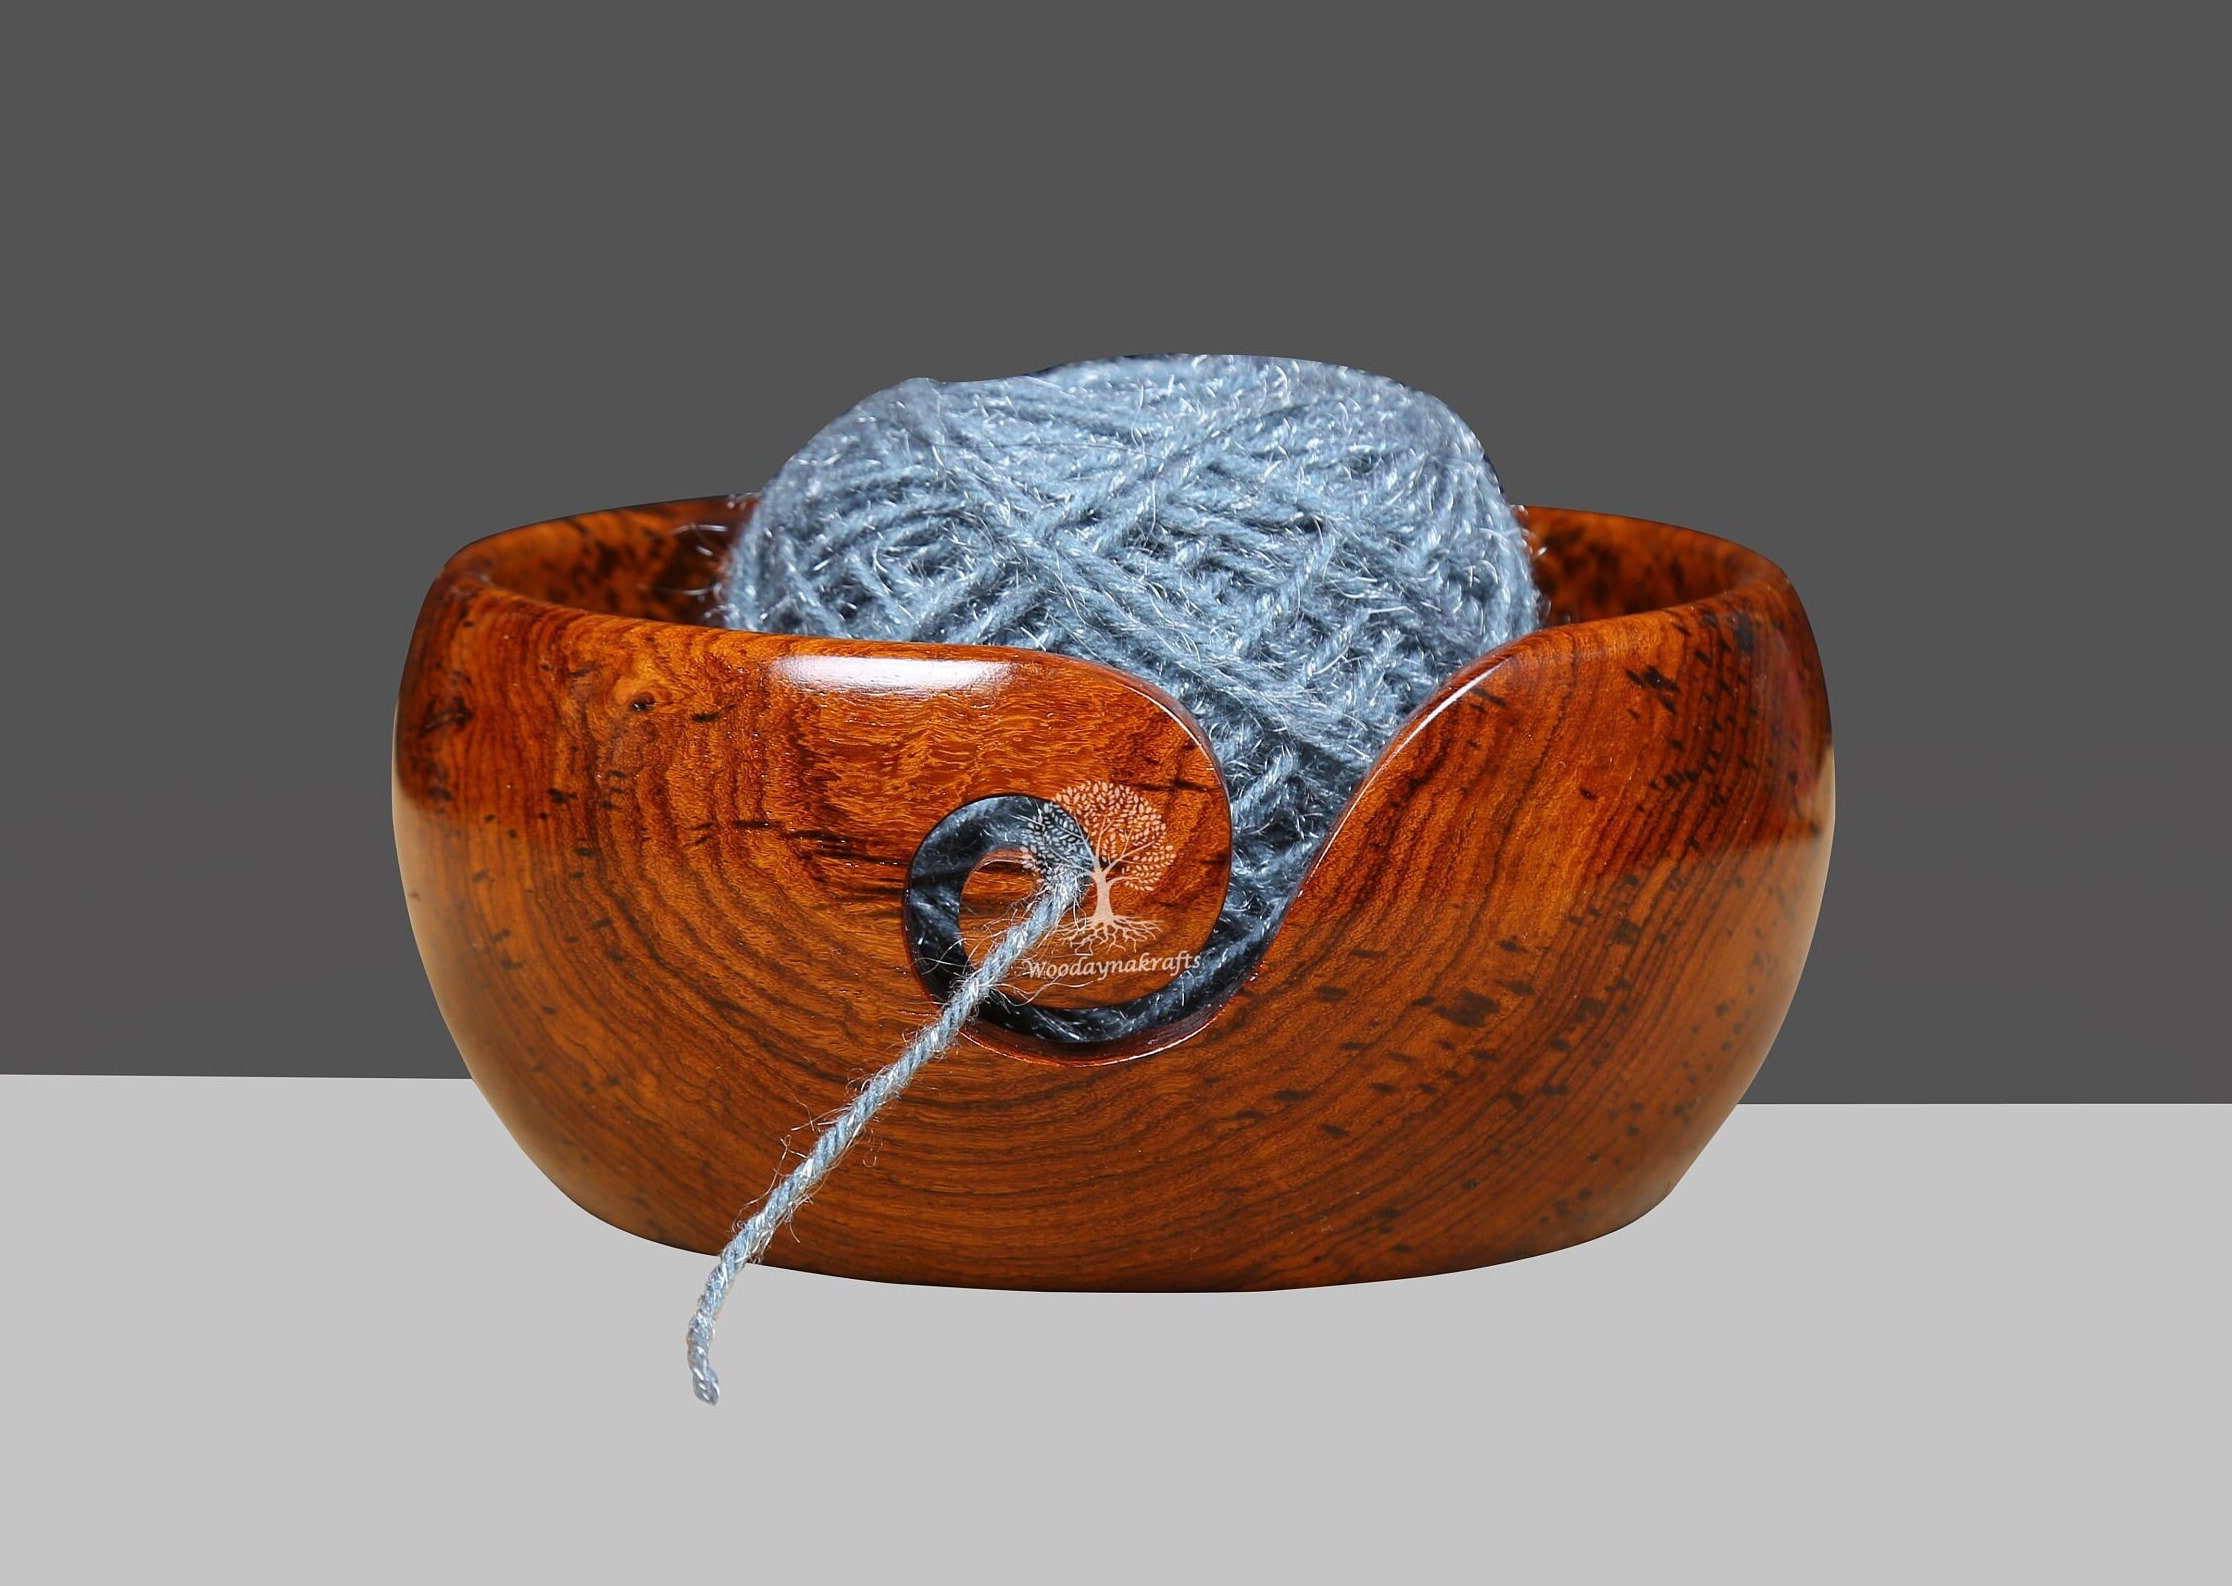 Yarn Bowl for Crochet by Laborwood | Large Size Wooden Knitting Bowl 7x4  inch | Handmade Heavy Cat Yarn Bowl Wood | Must Have Wooden Knitting Bowls